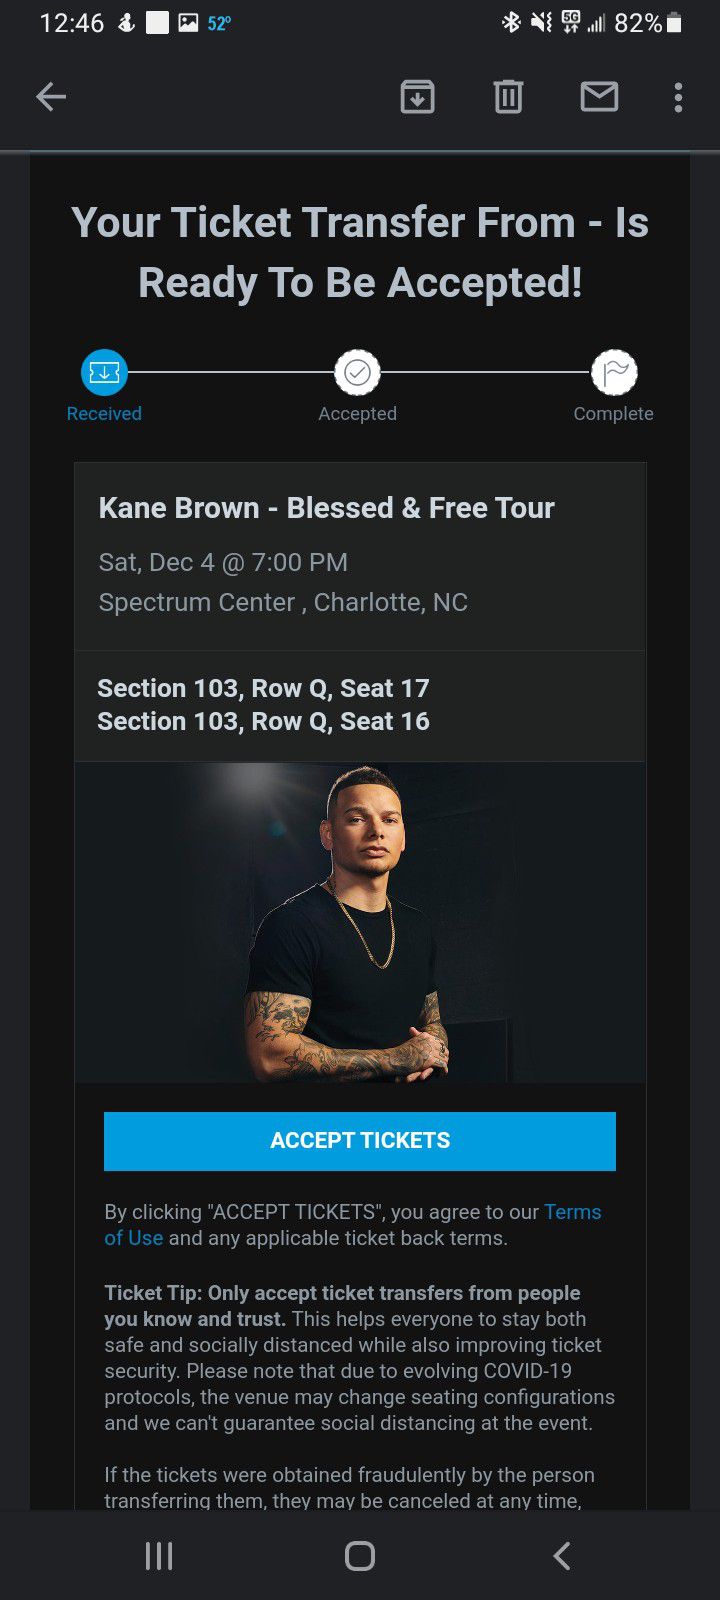 2 KANE BROWN TICKETS for THIS SATURDAY DECEMBER 4TH